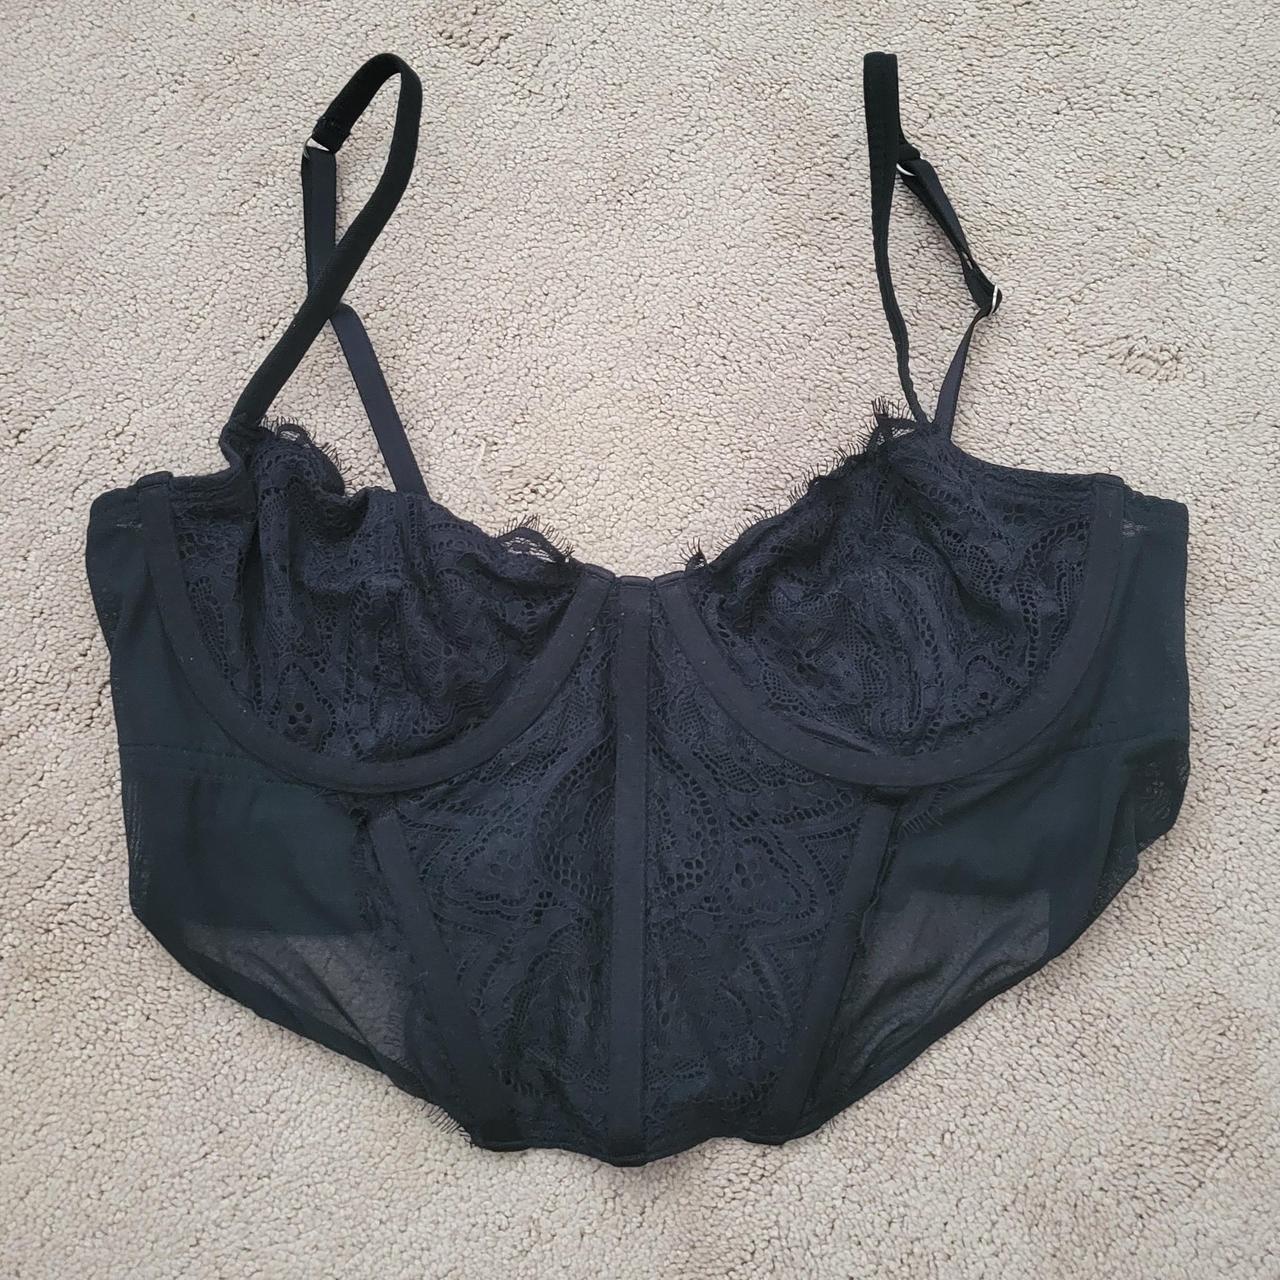 Gilly Hicks Lace Corset Bra Top - SEND OFFERS! - - Depop